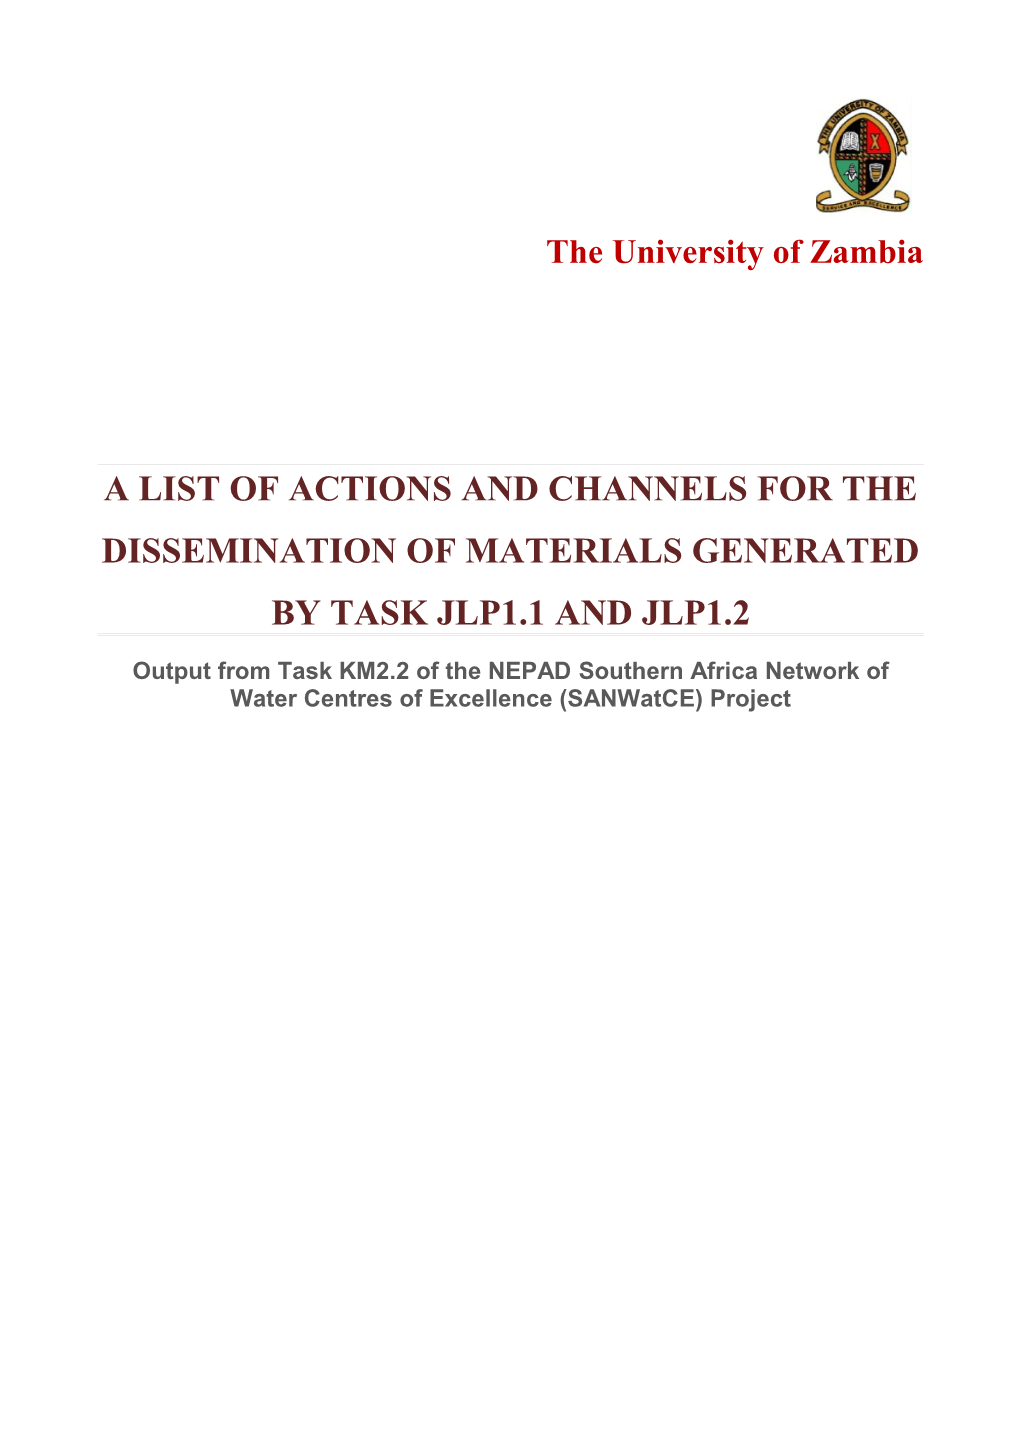 A List of Actions and Channels for the Dissemination of Materials Generated by Task JLP1.1